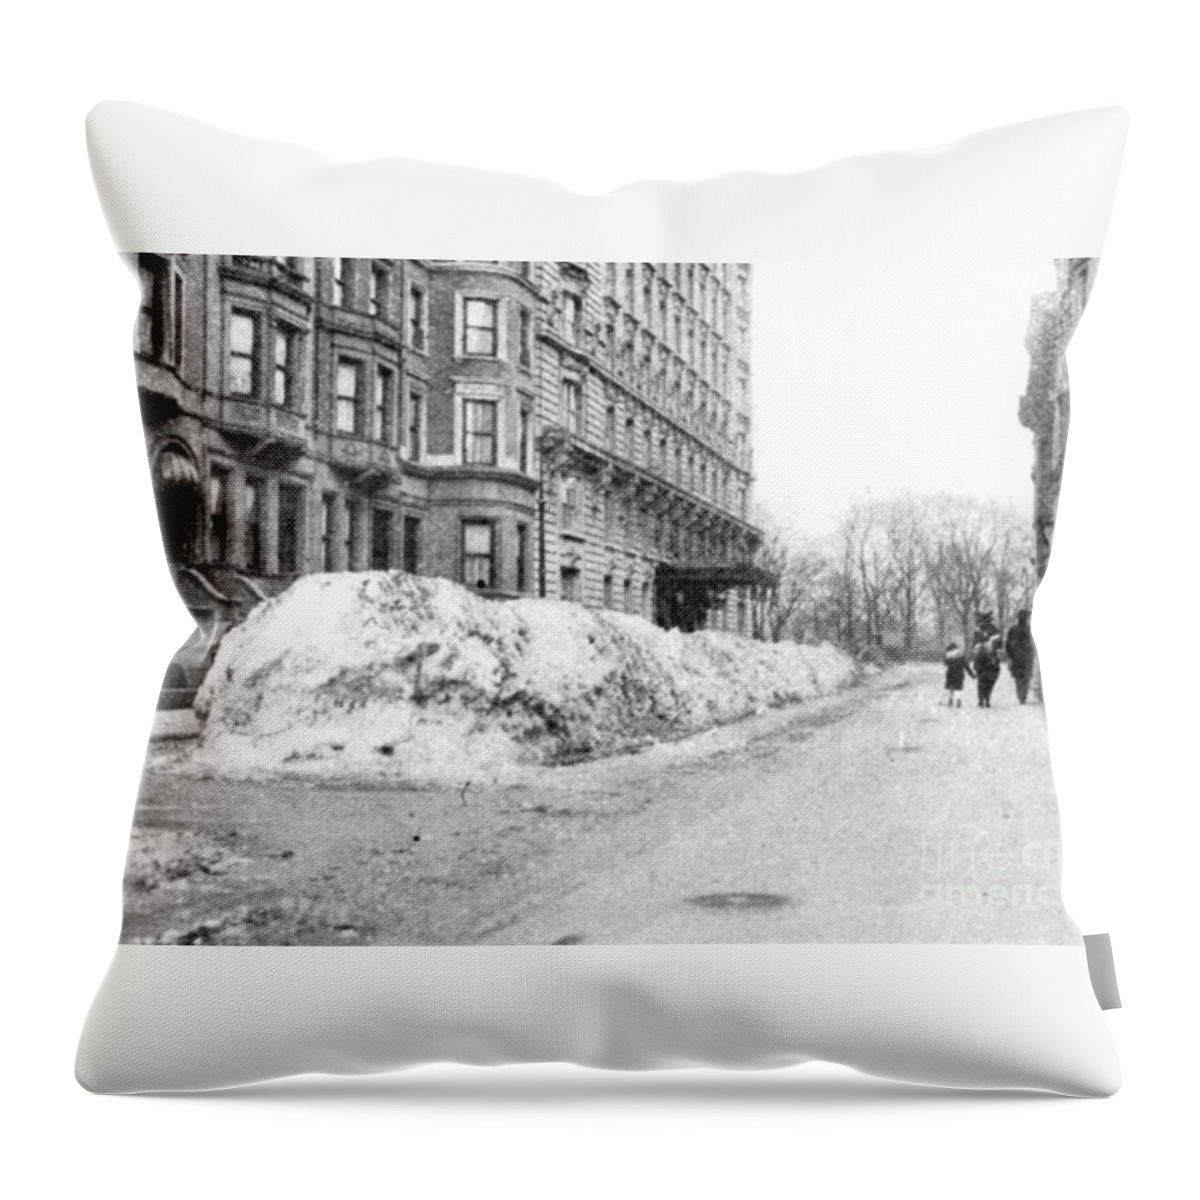 Science Throw Pillow featuring the photograph Snow Removal, Nyc, 1915 by Science Source